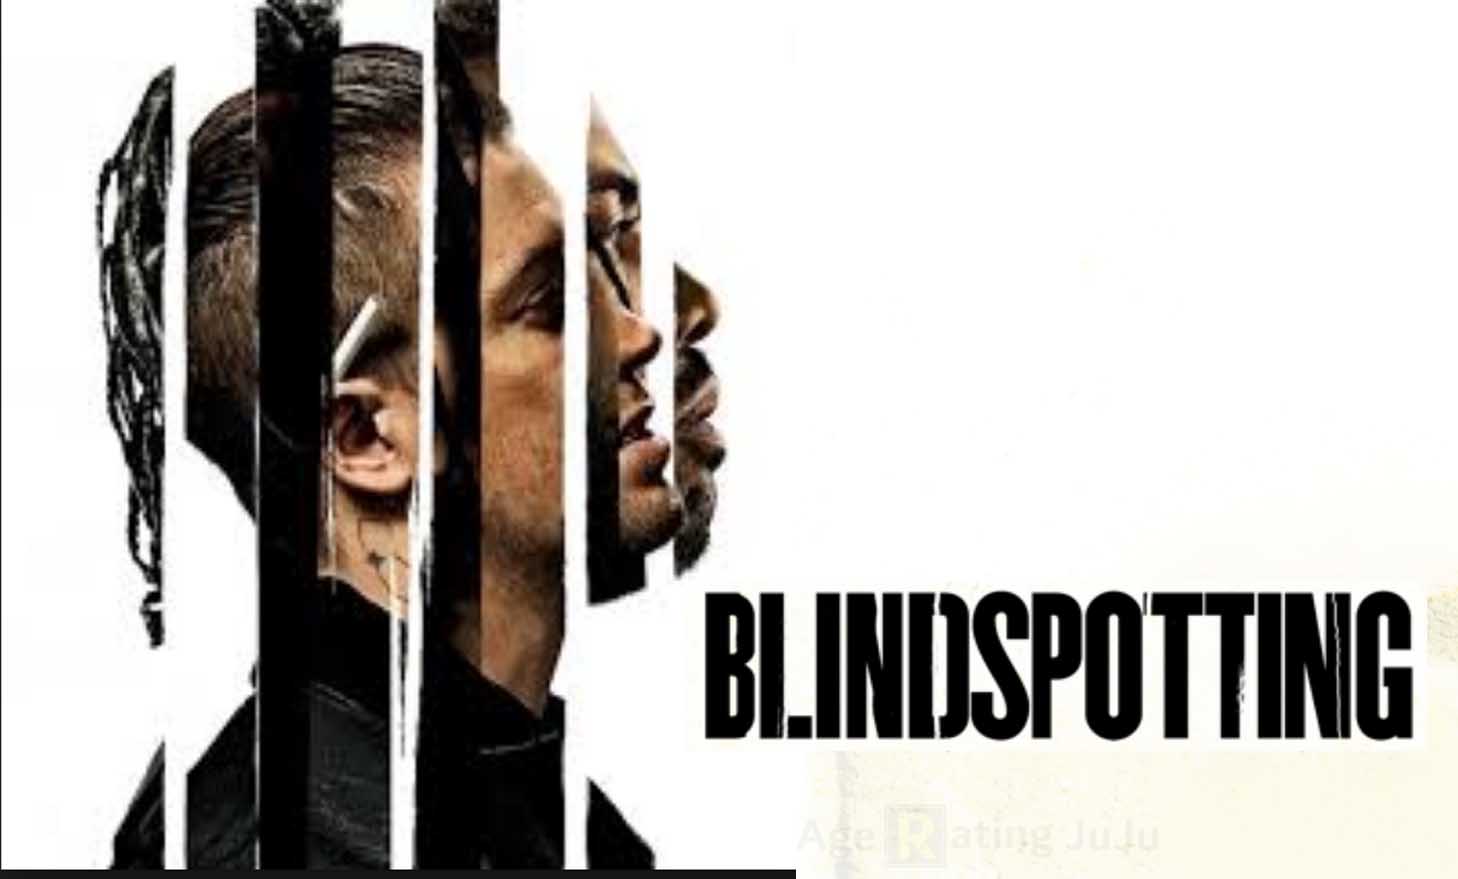 Blindspotting Age Rating 2018 - Movie Poster Images and Wallpapers